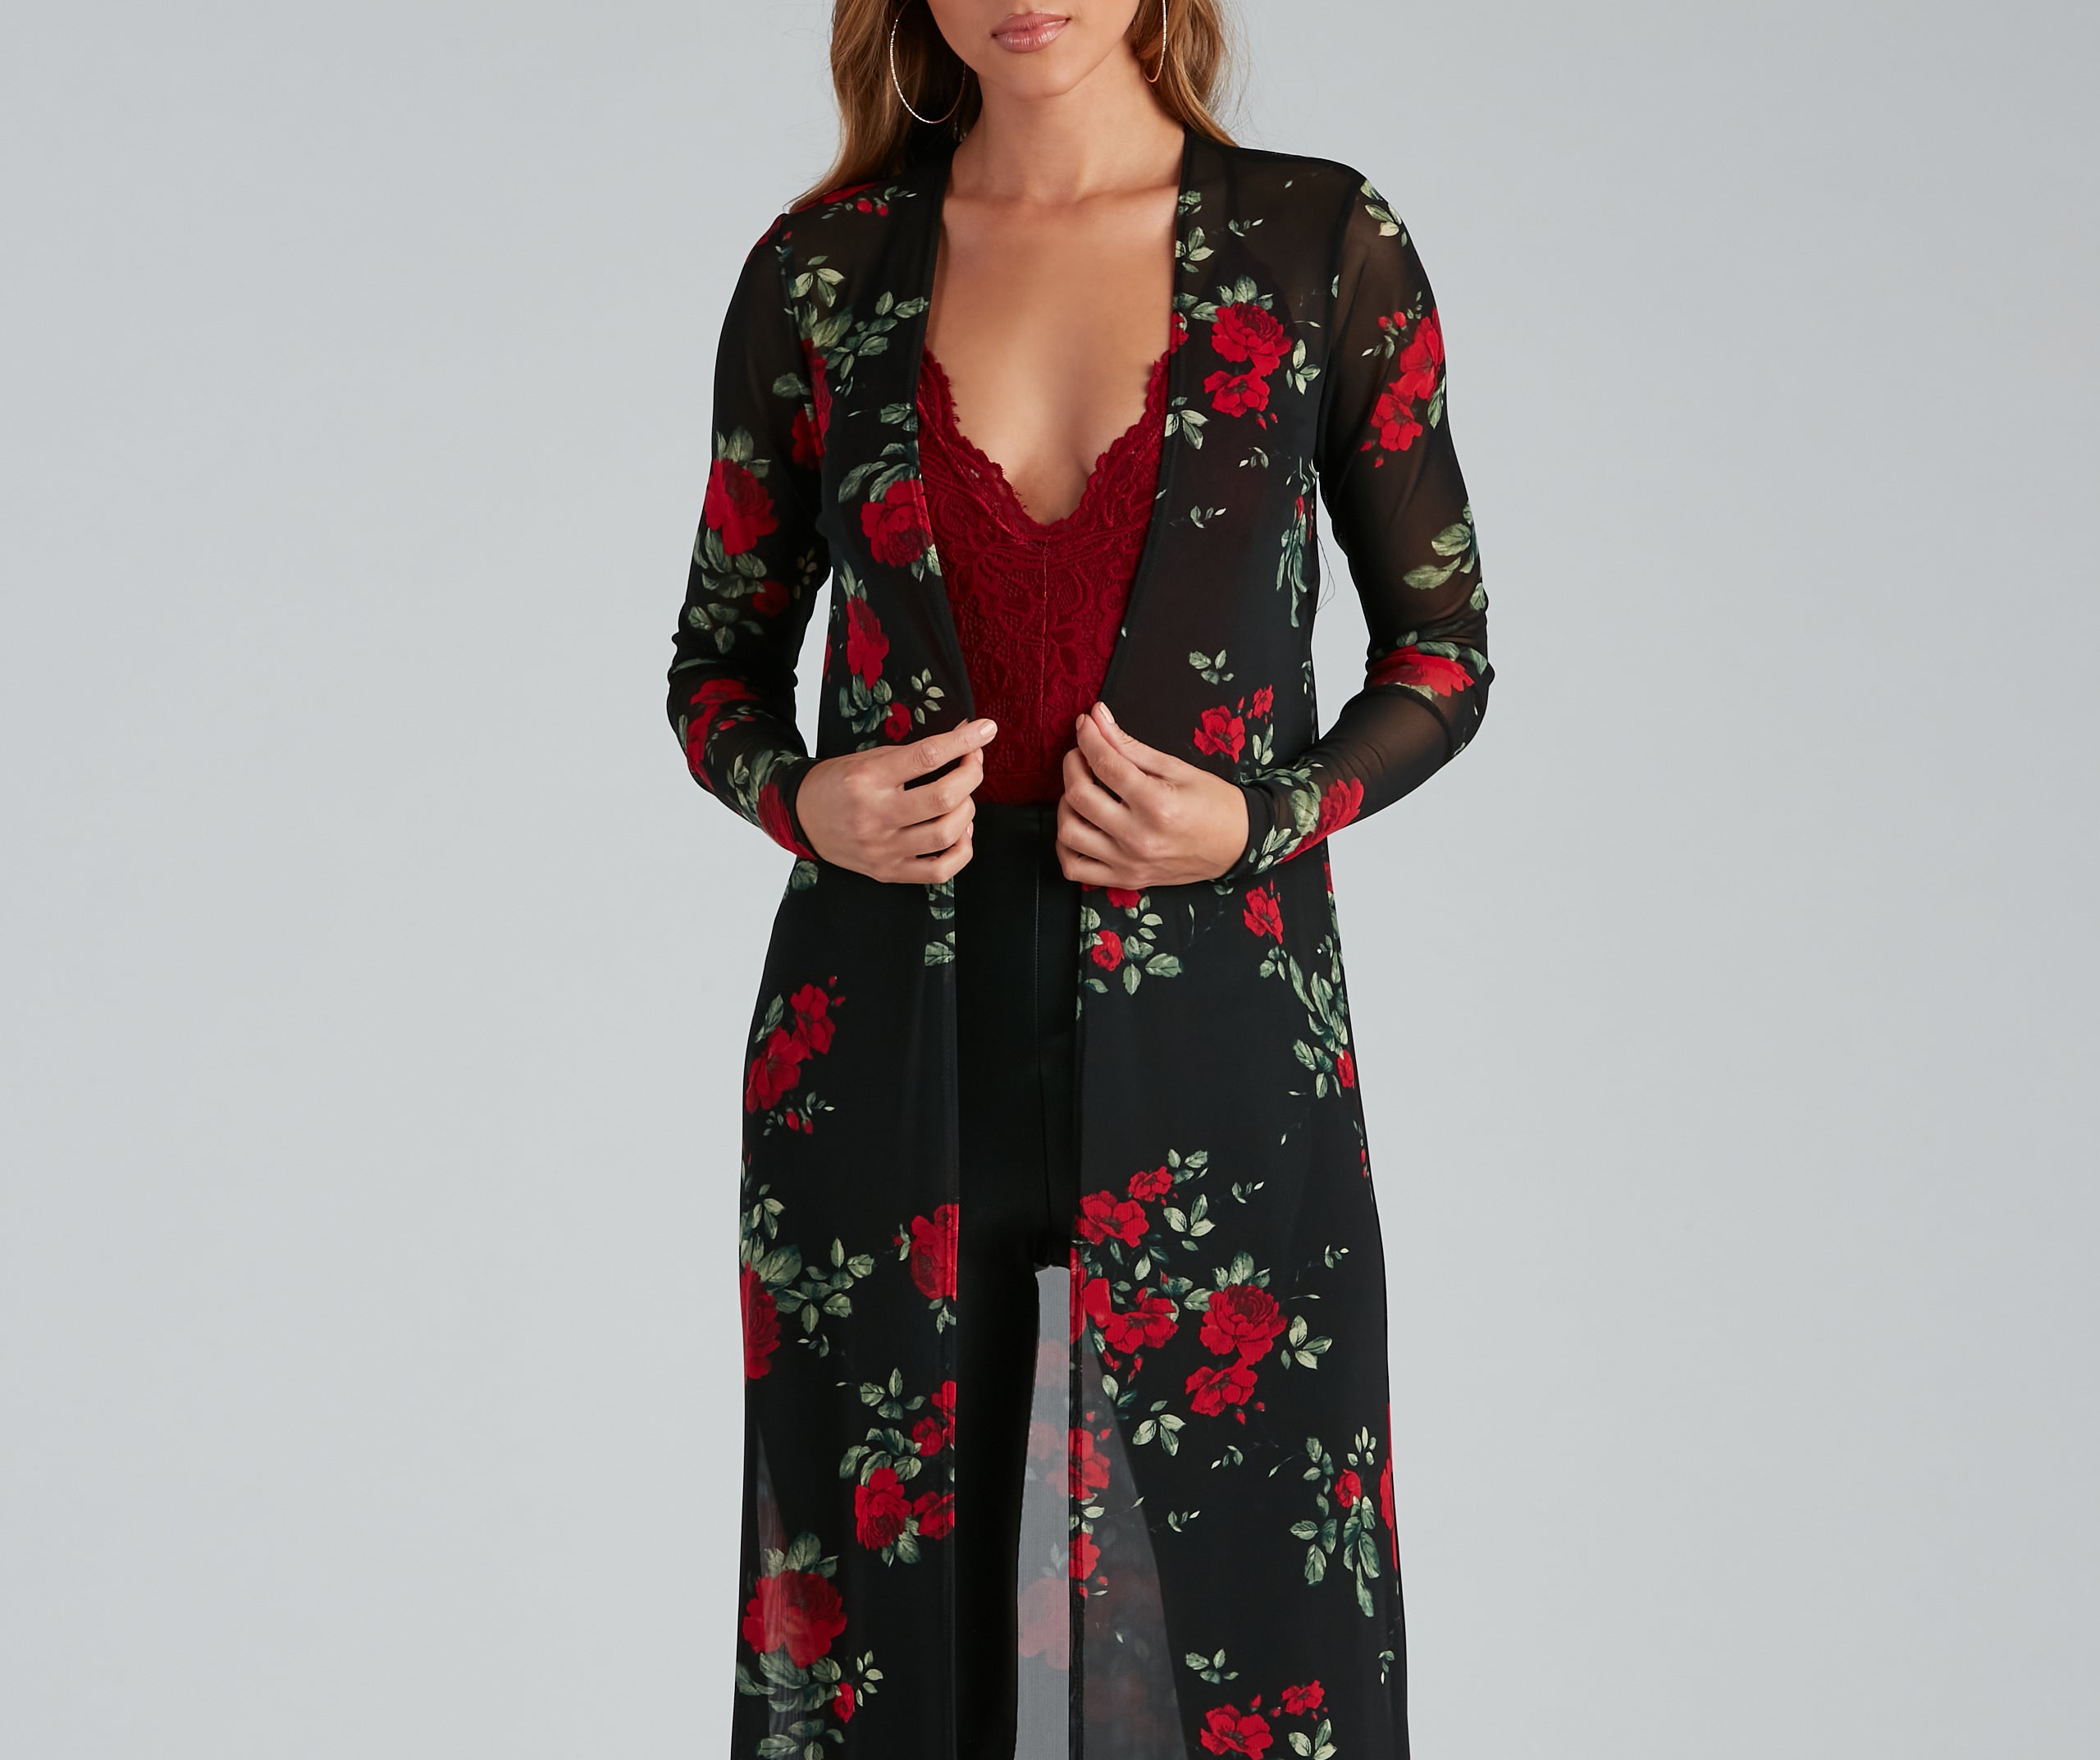 Blooming Beauty Floral Print Duster